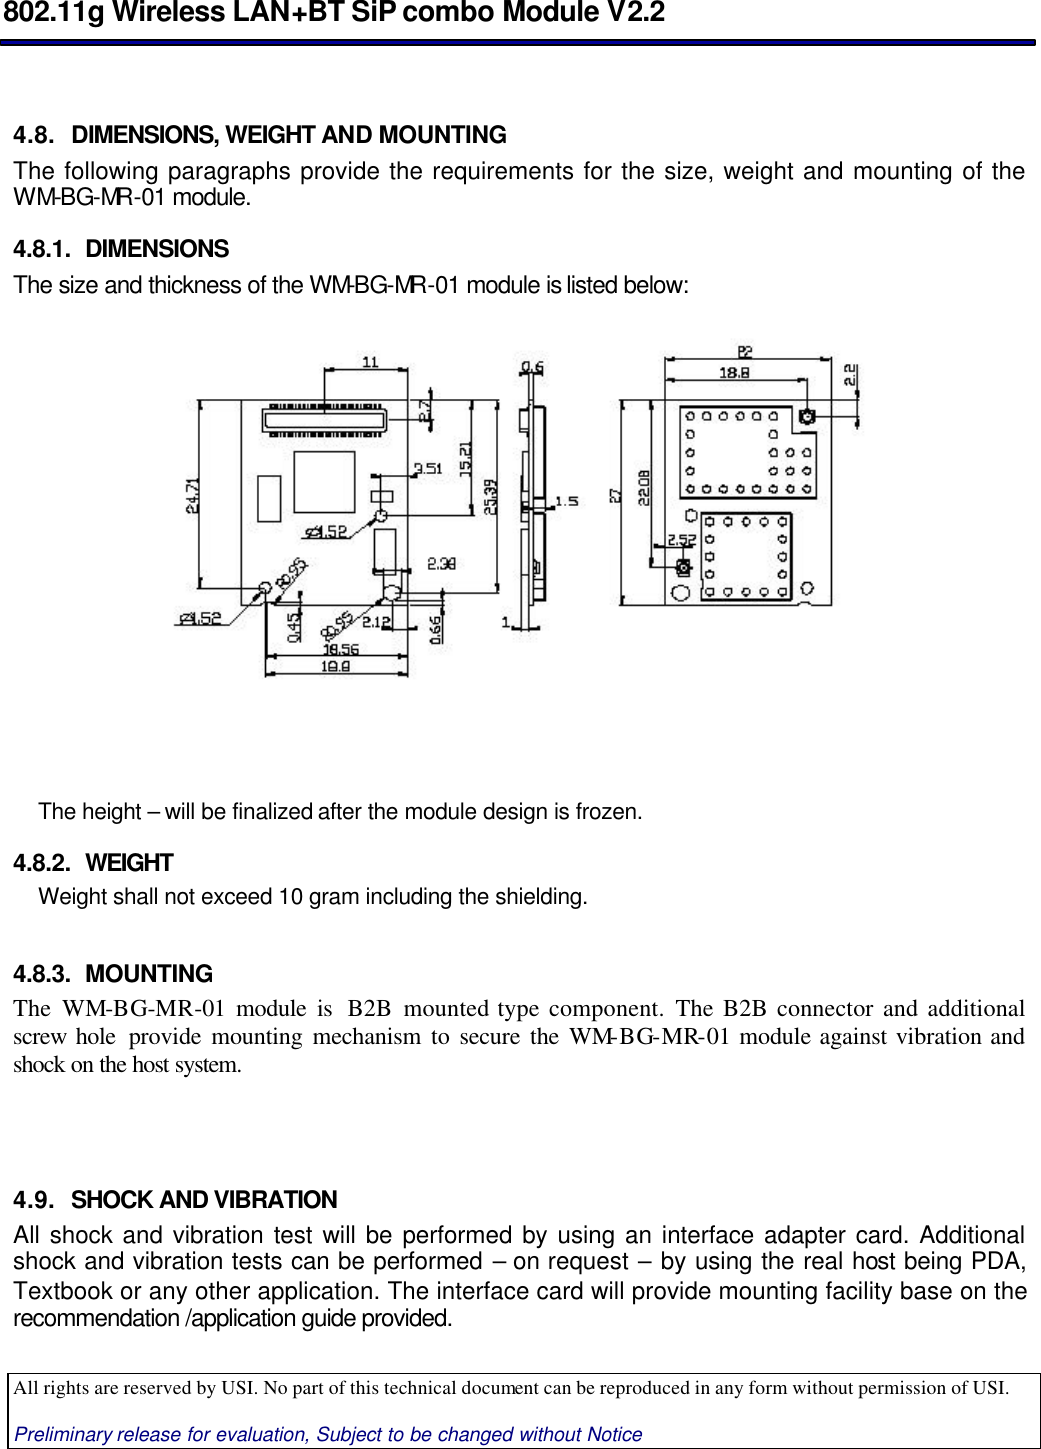  802.11g Wireless LAN+BT SiP combo Module V2.2  All rights are reserved by USI. No part of this technical document can be reproduced in any form without permission of USI.  Preliminary release for evaluation, Subject to be changed without Notice                                       4.8. DIMENSIONS, WEIGHT AND MOUNTING The following paragraphs provide the requirements for the size, weight and mounting of the WM-BG-MR -01 module. 4.8.1. DIMENSIONS The size and thickness of the WM-BG-MR -01 module is listed below:       The height – will be finalized after the module design is frozen. 4.8.2. WEIGHT Weight shall not exceed 10 gram including the shielding.  4.8.3. MOUNTING The WM-BG-MR-01 module is  B2B mounted type component. The B2B connector and additional screw hole  provide mounting mechanism to secure the WM-BG-MR-01 module against vibration and shock on the host system.    4.9. SHOCK AND VIBRATION  All shock and vibration test will be performed by using an interface adapter card. Additional shock and vibration tests can be performed – on request – by using the real host being PDA, Textbook or any other application. The interface card will provide mounting facility base on the recommendation /application guide provided. 